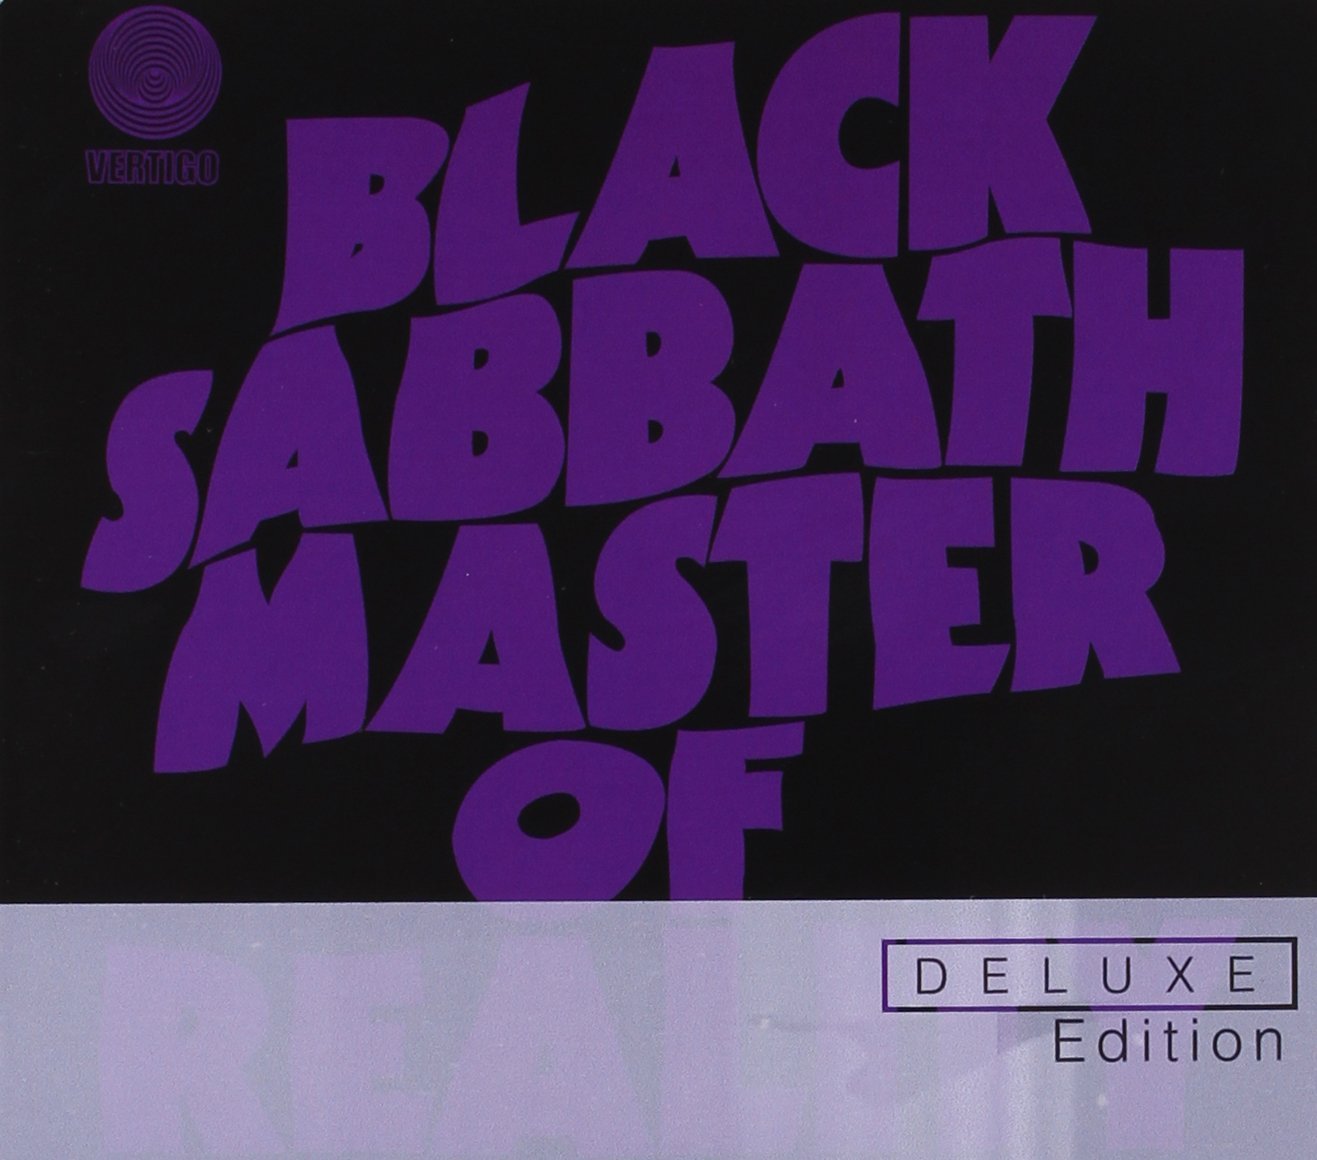 Master of Reality Deluxe Edition | Black Sabbath